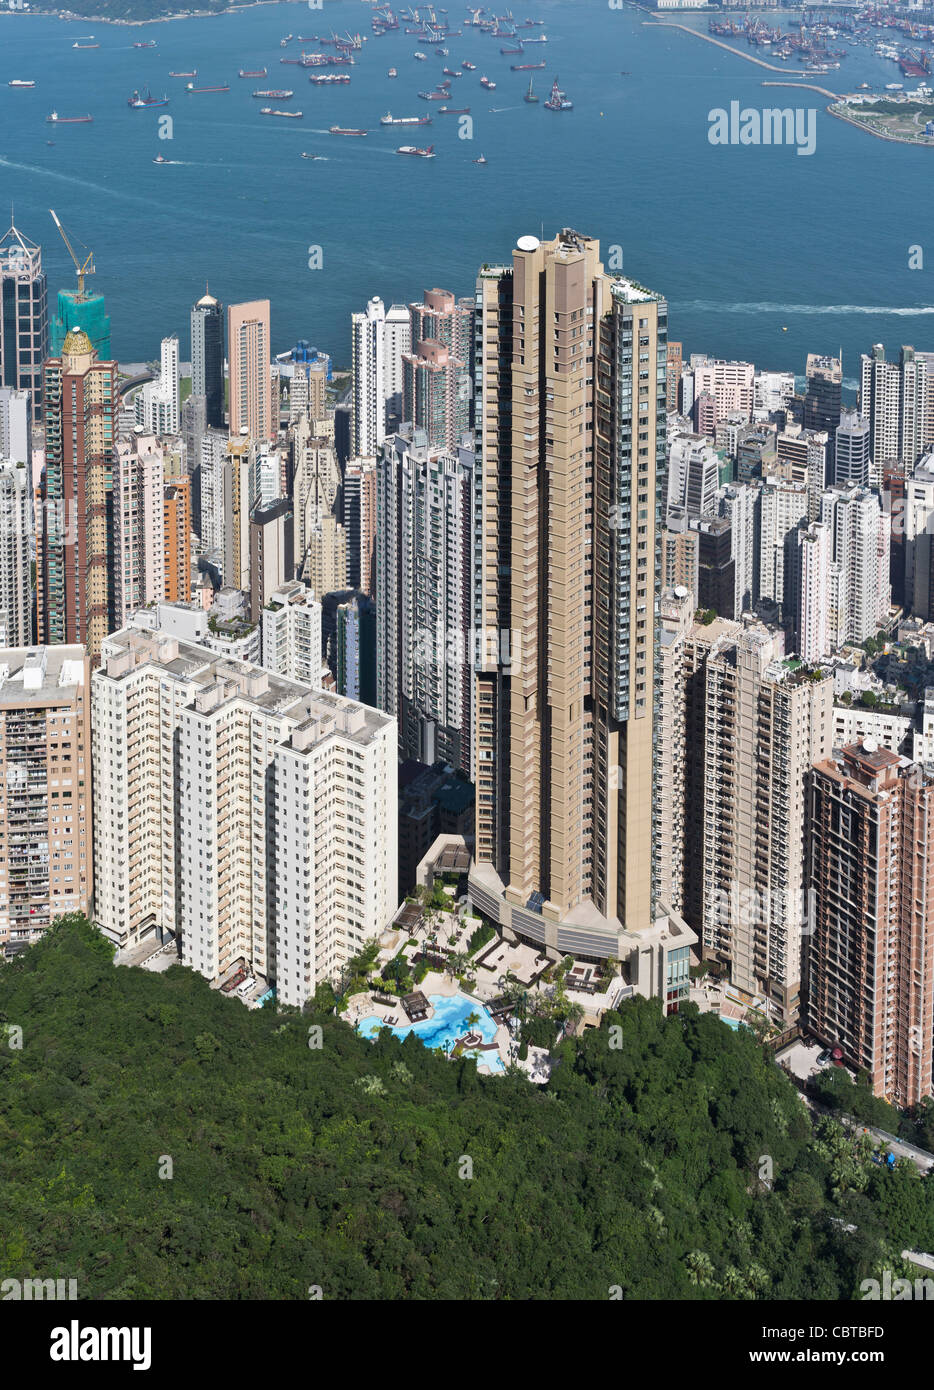 dh  MID LEVELS HONG KONG Skyscraper residential flats above harbour level tower blocks building flat high rise apartments buildings living Stock Photo